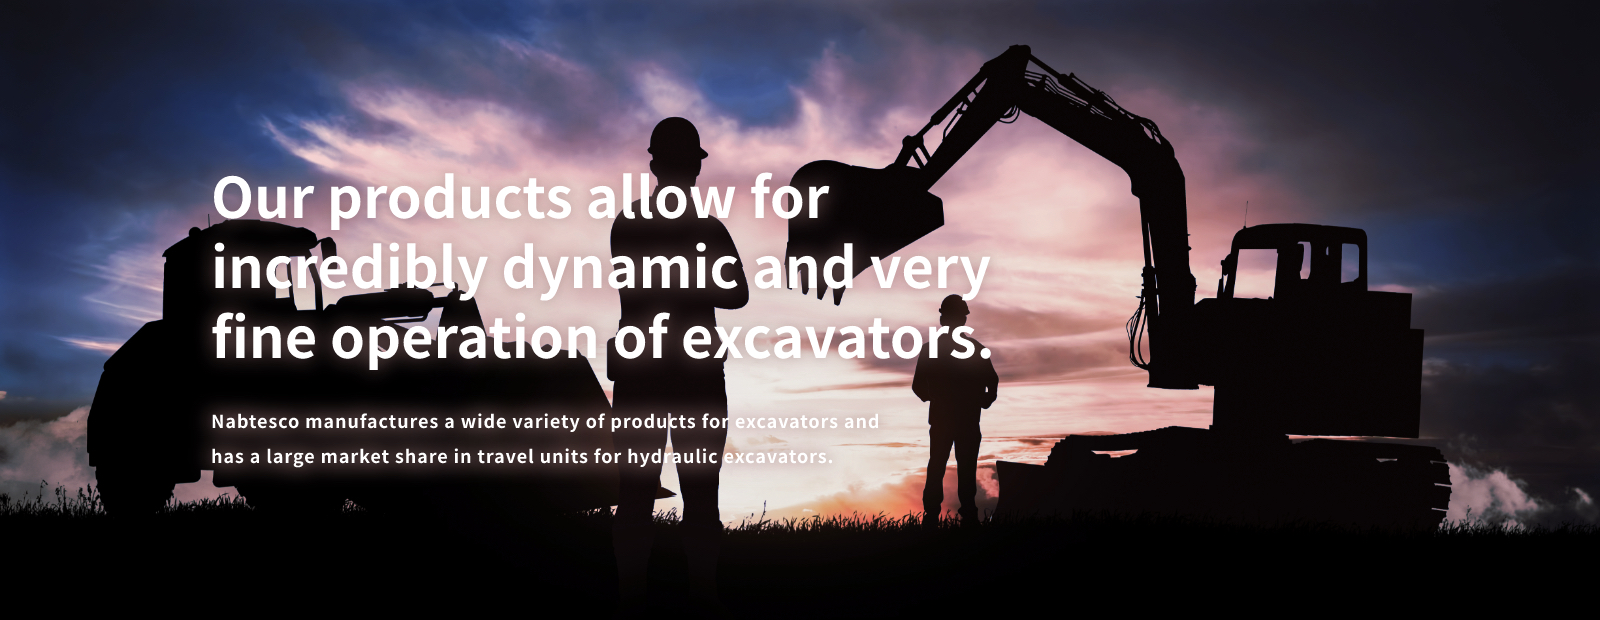 Our products allow for incredibly dynamic and very fine operation of excavators.